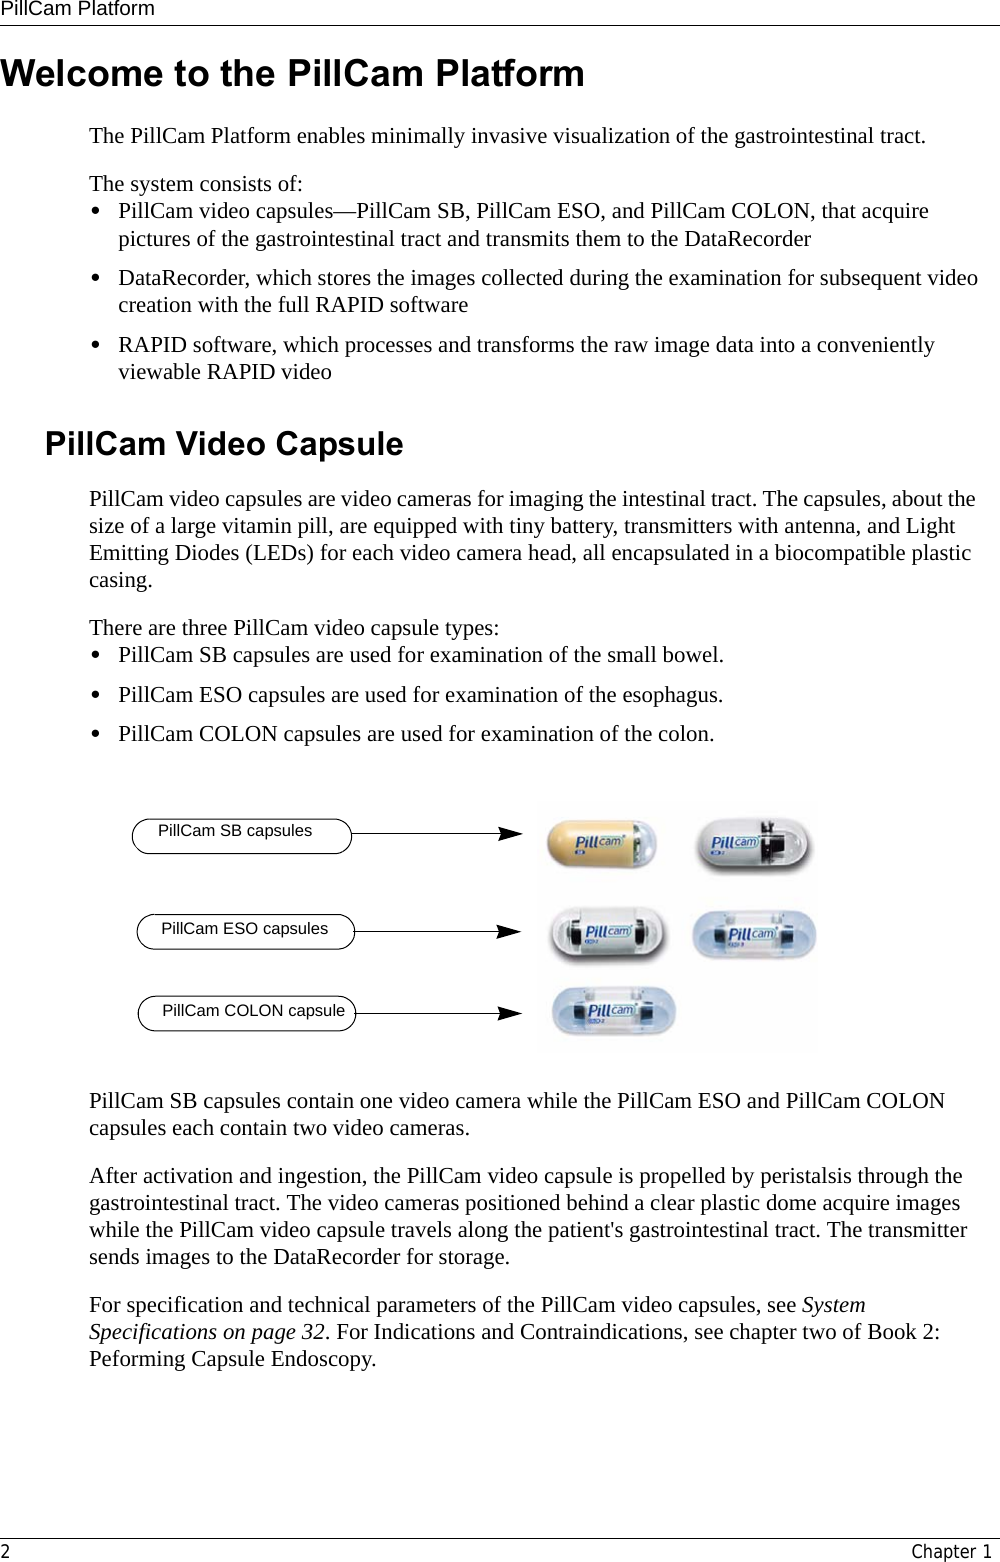 PillCam Platform2Chapter 1Welcome to the PillCam PlatformThe PillCam Platform enables minimally invasive visualization of the gastrointestinal tract. The system consists of:•PillCam video capsules—PillCam SB, PillCam ESO, and PillCam COLON, that acquire pictures of the gastrointestinal tract and transmits them to the DataRecorder•DataRecorder, which stores the images collected during the examination for subsequent video creation with the full RAPID software •RAPID software, which processes and transforms the raw image data into a conveniently viewable RAPID videoPillCam Video CapsulePillCam video capsules are video cameras for imaging the intestinal tract. The capsules, about the size of a large vitamin pill, are equipped with tiny battery, transmitters with antenna, and Light Emitting Diodes (LEDs) for each video camera head, all encapsulated in a biocompatible plastic casing.There are three PillCam video capsule types: •PillCam SB capsules are used for examination of the small bowel.•PillCam ESO capsules are used for examination of the esophagus. •PillCam COLON capsules are used for examination of the colon.PillCam SB capsules contain one video camera while the PillCam ESO and PillCam COLON capsules each contain two video cameras. After activation and ingestion, the PillCam video capsule is propelled by peristalsis through the gastrointestinal tract. The video cameras positioned behind a clear plastic dome acquire images while the PillCam video capsule travels along the patient&apos;s gastrointestinal tract. The transmitter sends images to the DataRecorder for storage. For specification and technical parameters of the PillCam video capsules, see System Specifications on page 32. For Indications and Contraindications, see chapter two of Book 2: Peforming Capsule Endoscopy. PillCam SB capsulesPillCam ESO capsulesPillCam COLON capsule